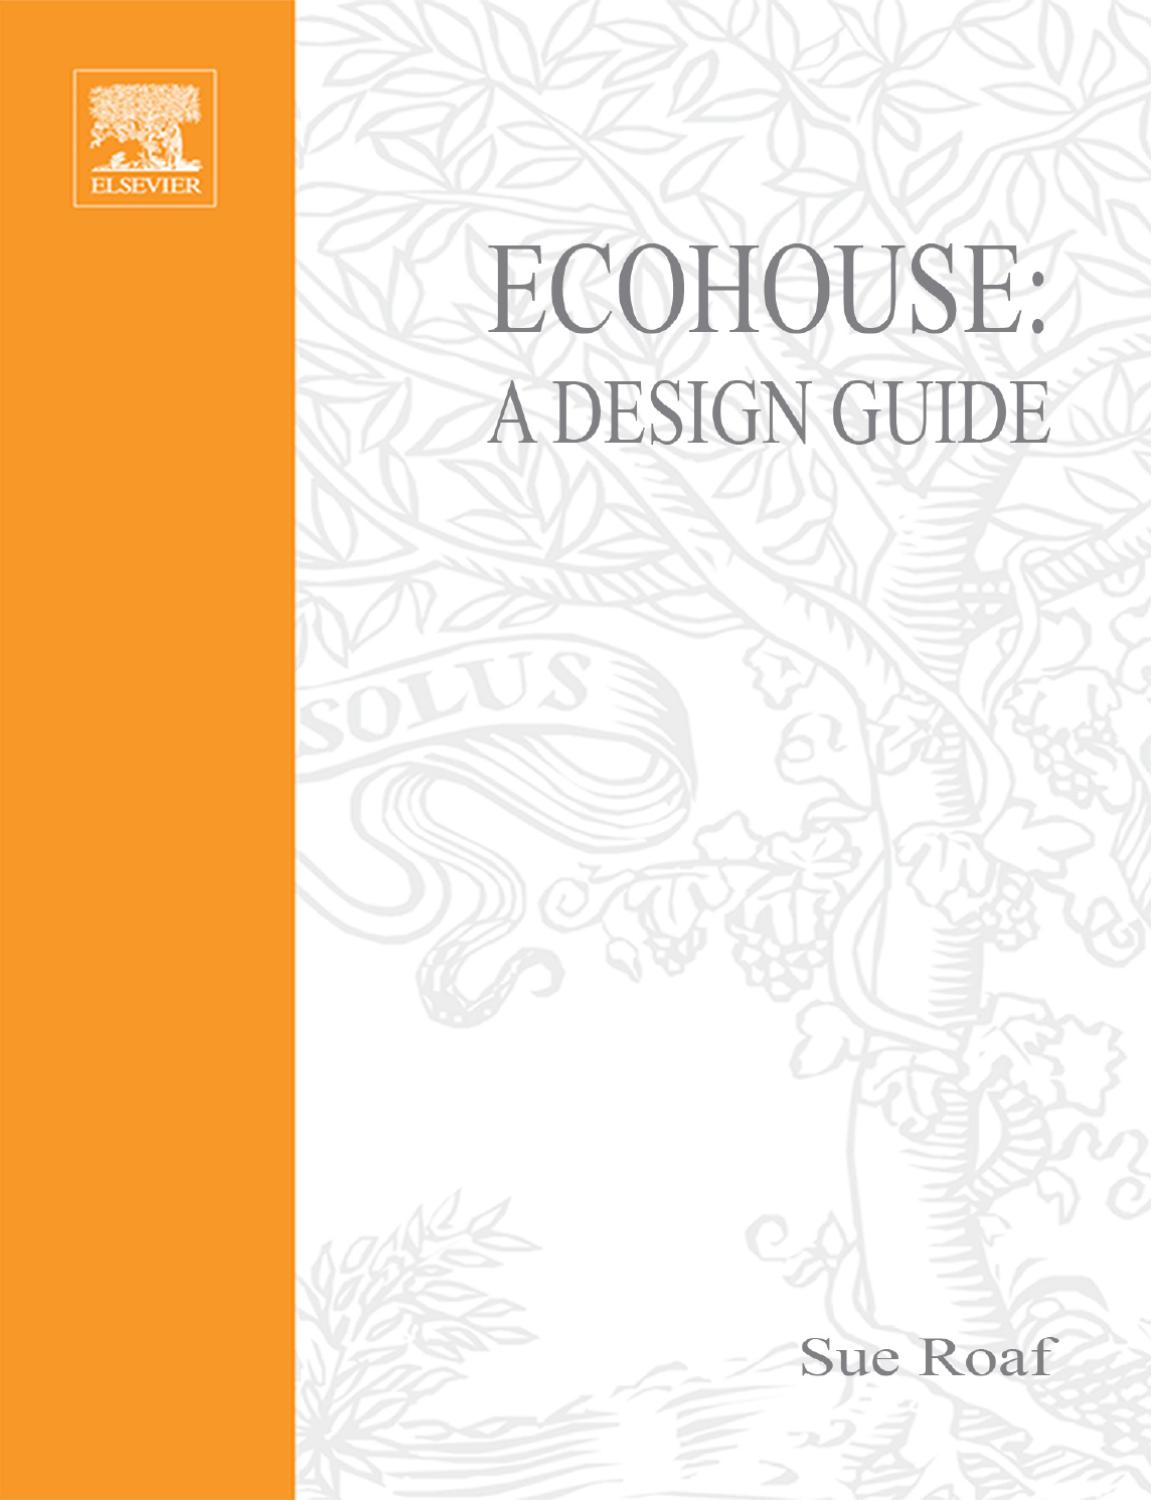 Fireproof Rugs for Fireplace Beautiful Roaf S Ecohouse A Design Guide by Alex Arhip issuu